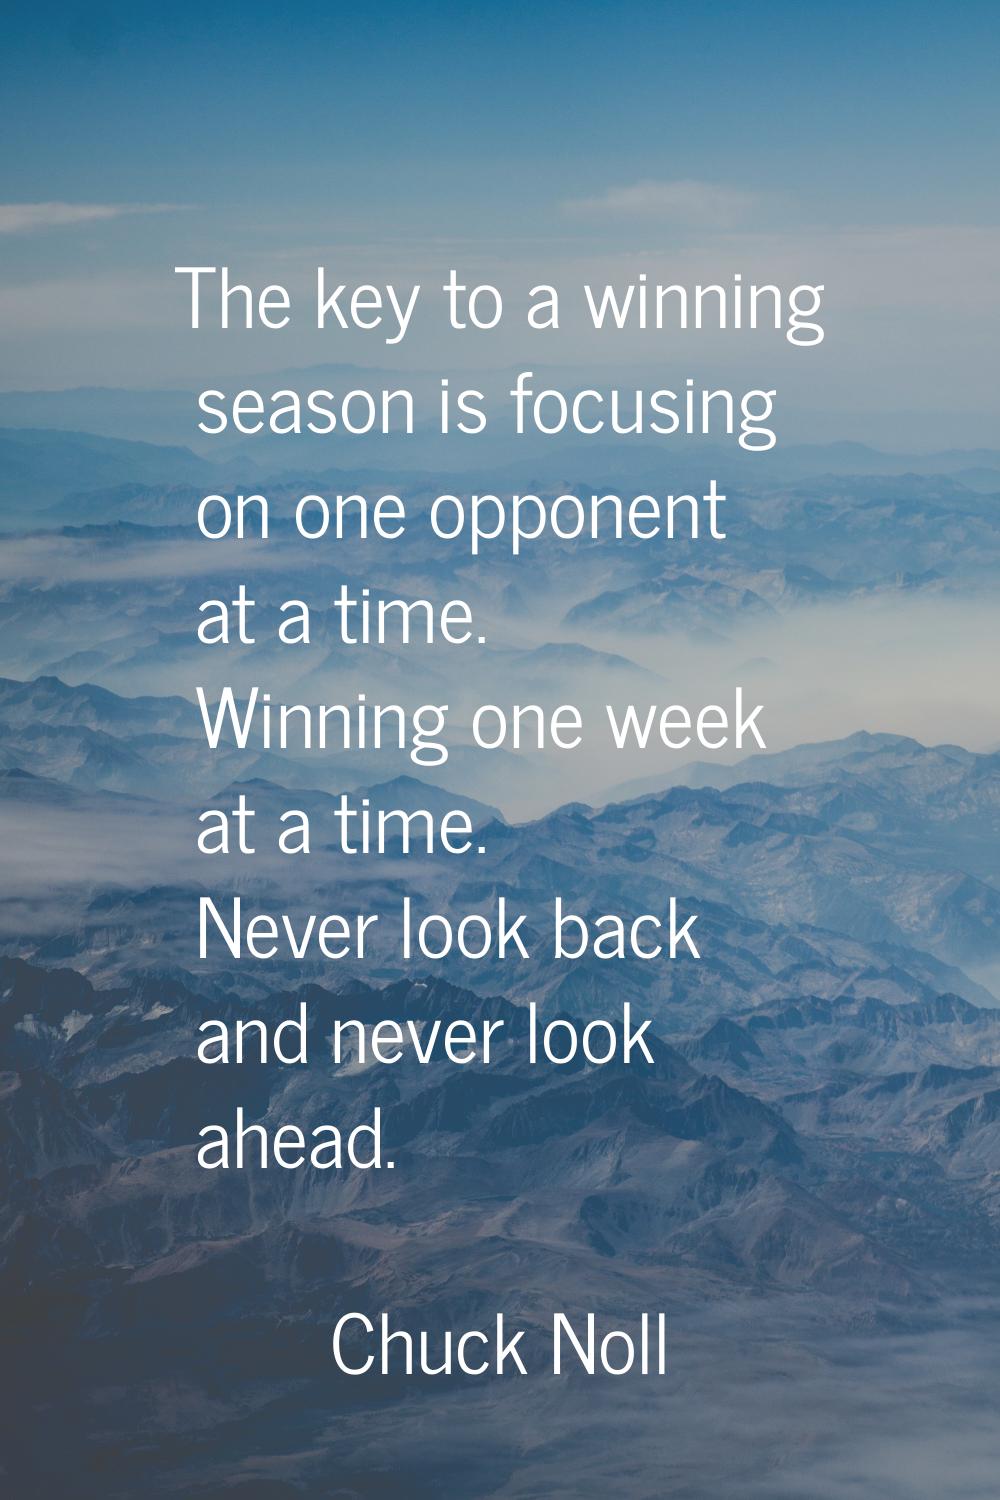 The key to a winning season is focusing on one opponent at a time. Winning one week at a time. Neve